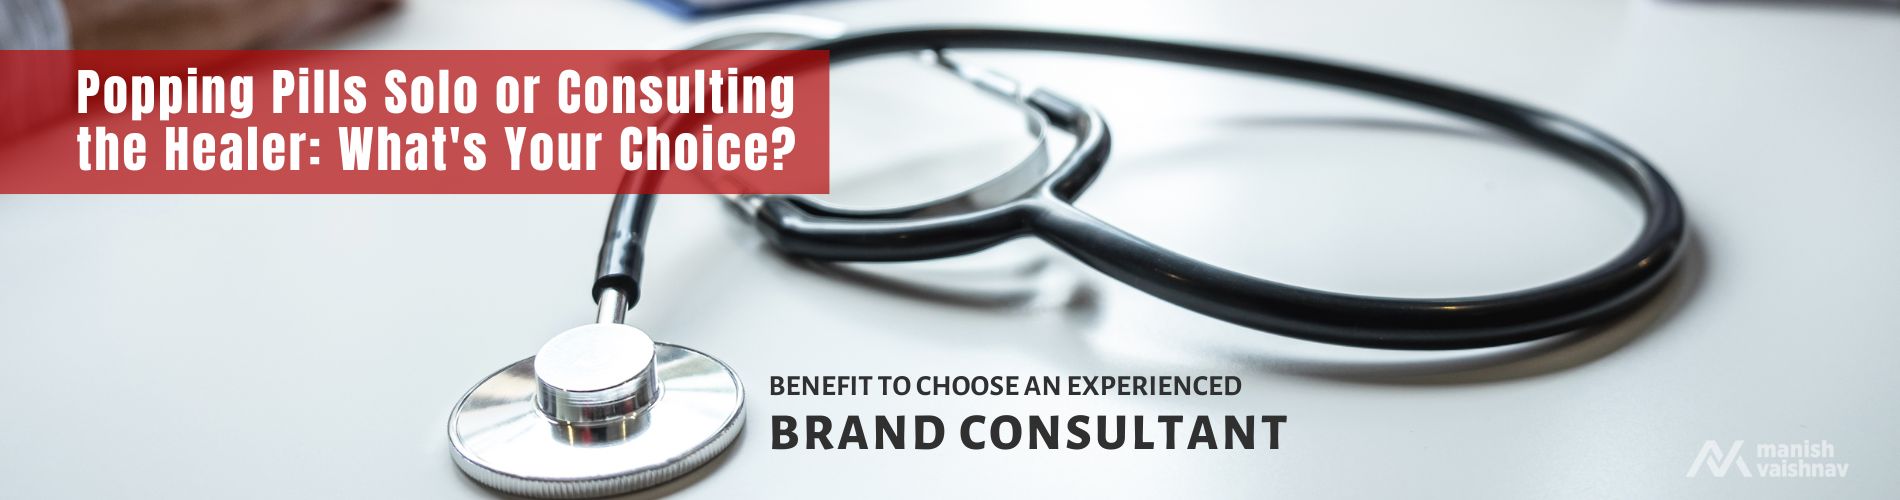 Experienced BRAND Consultant